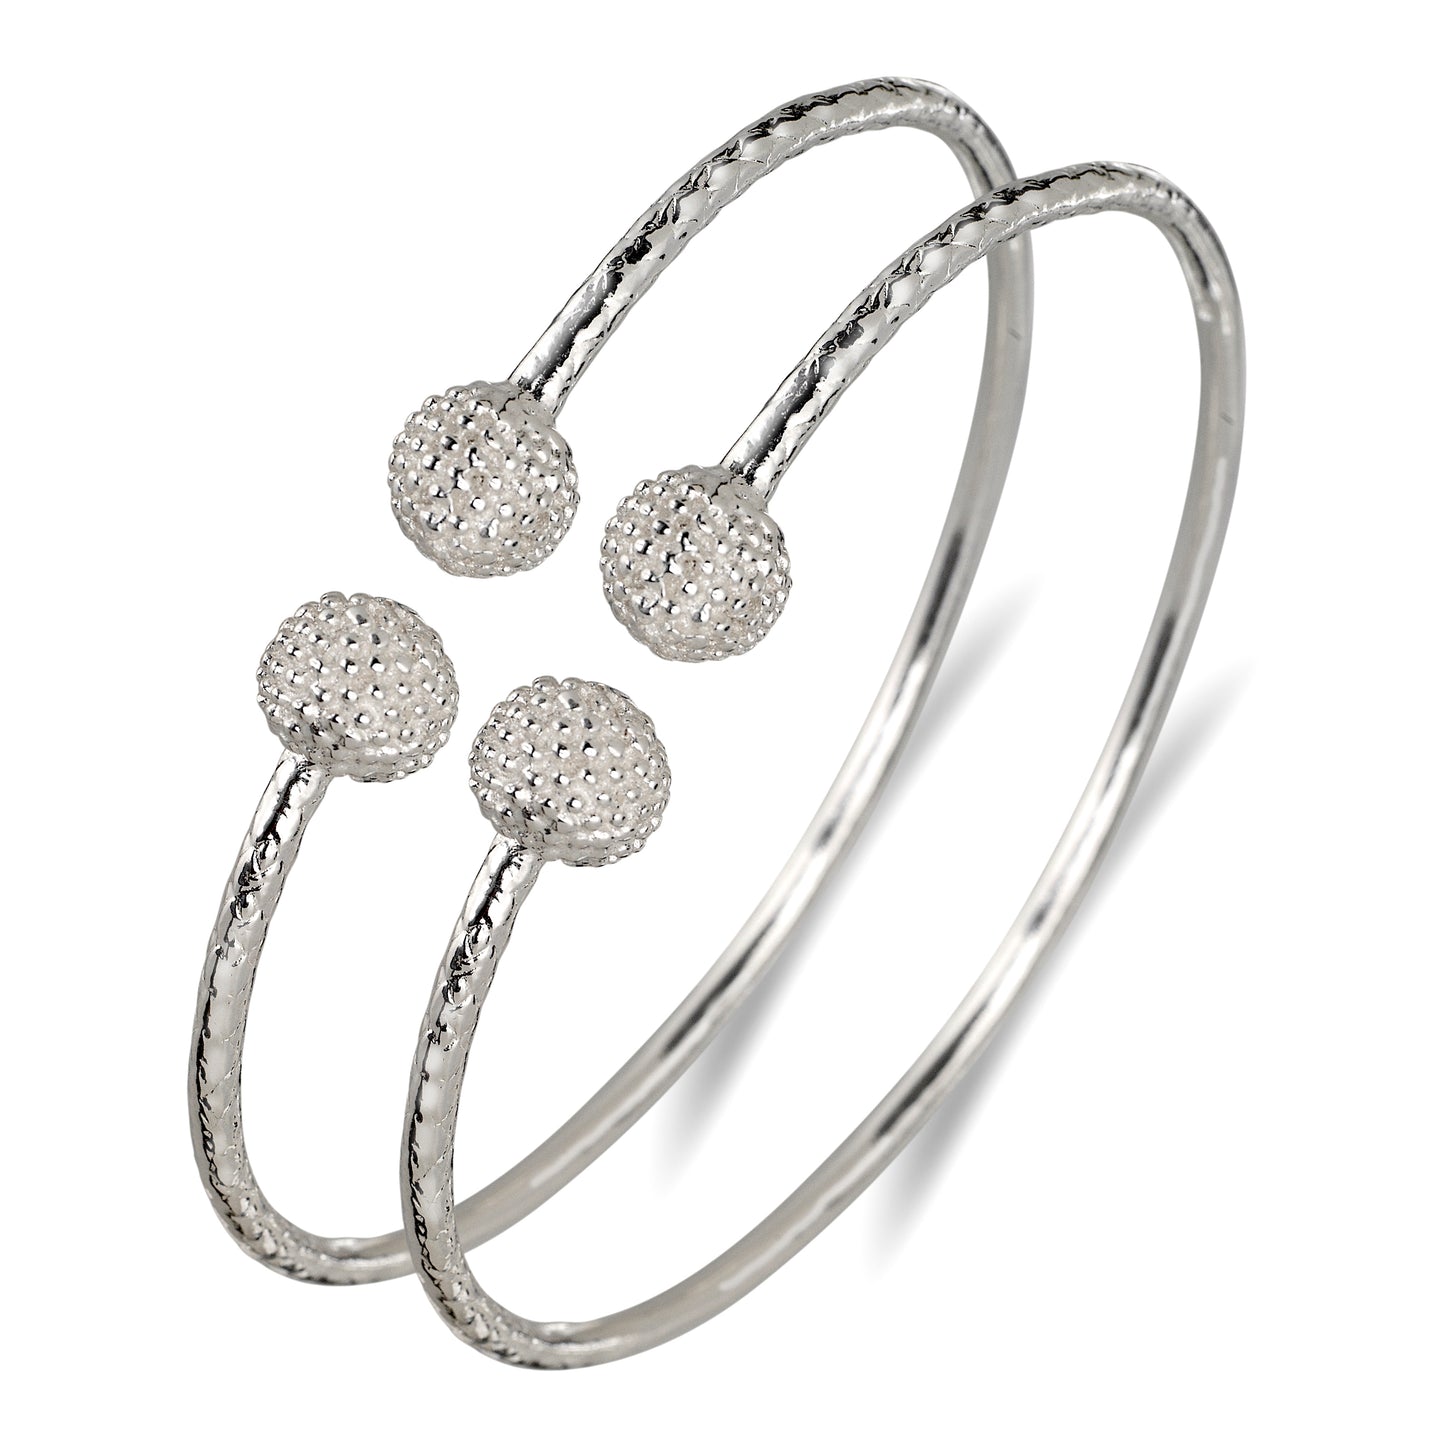 Better Jewelry Textured Ball .925 Sterling Silver West Indian Bangles (Pair) (Made in USA)